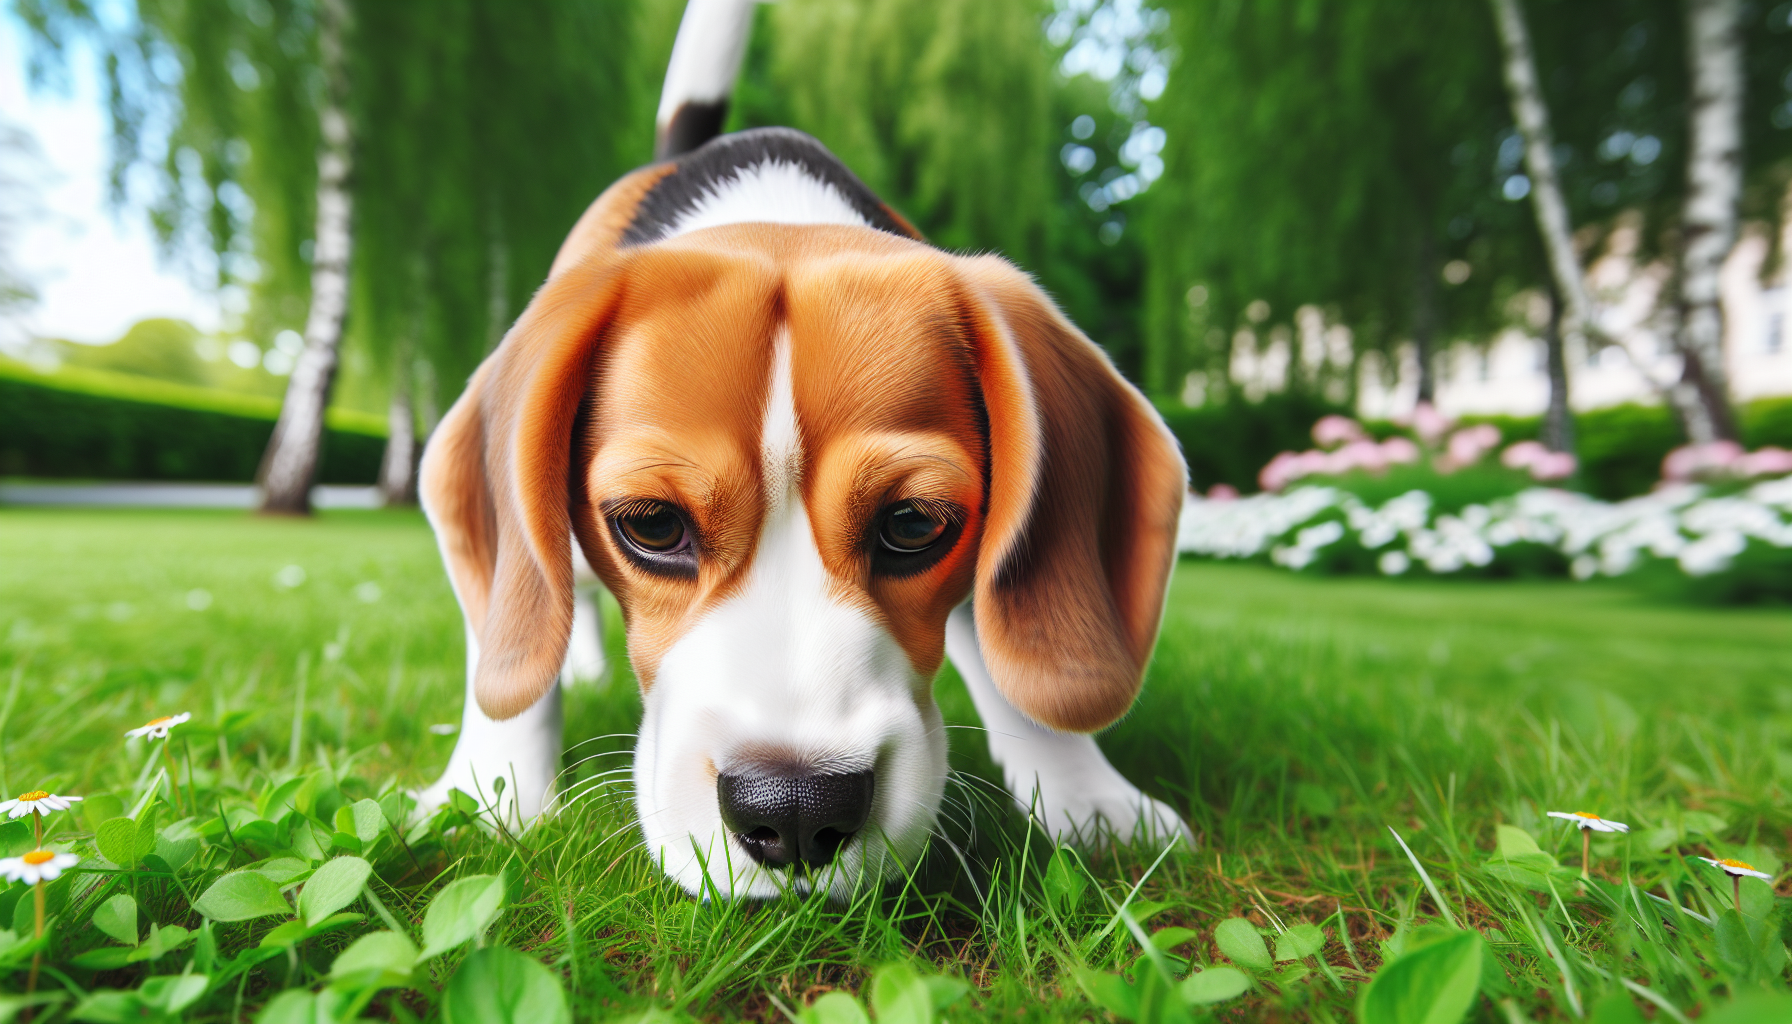 Beagle with its nose to the ground, sniffing the grass